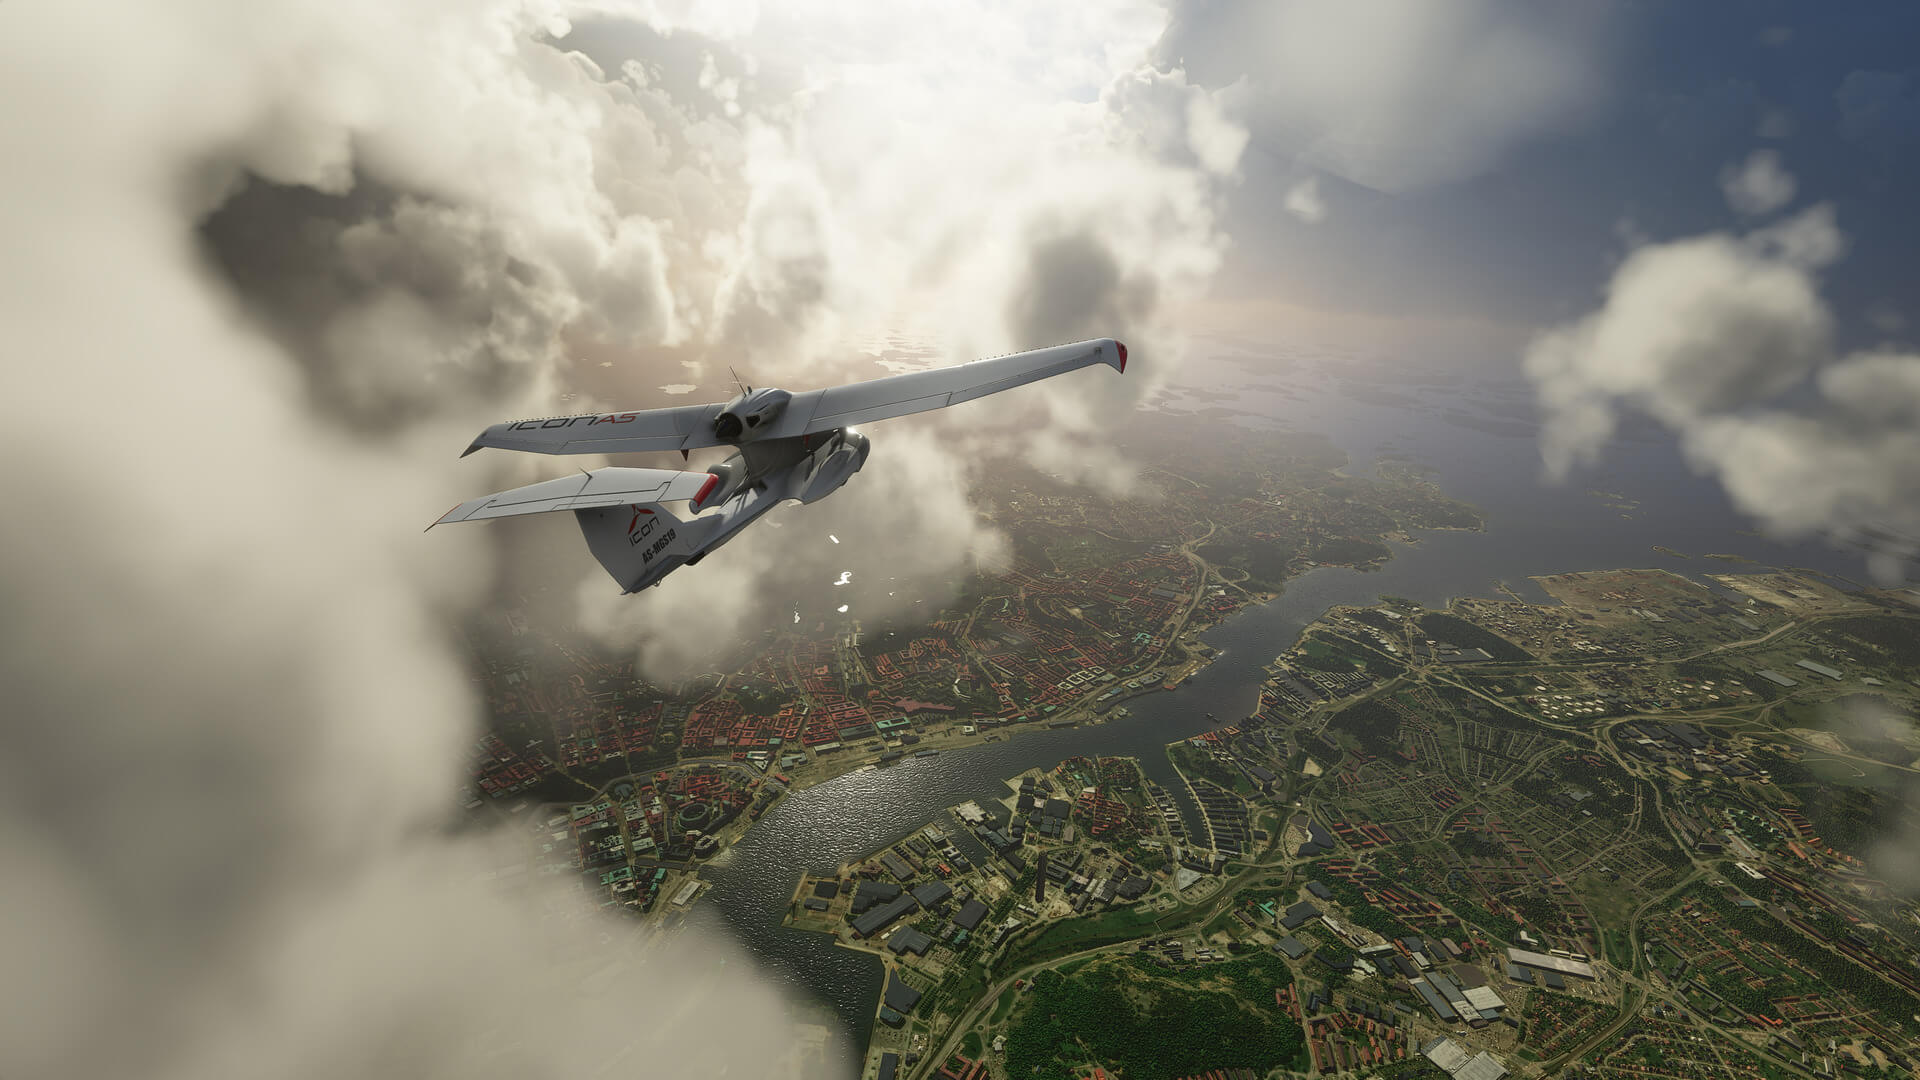 Microsoft Flight Simulator Free 40th Anniversary Edition Announced  Including New Aircraft, Helicopters, & Gliders